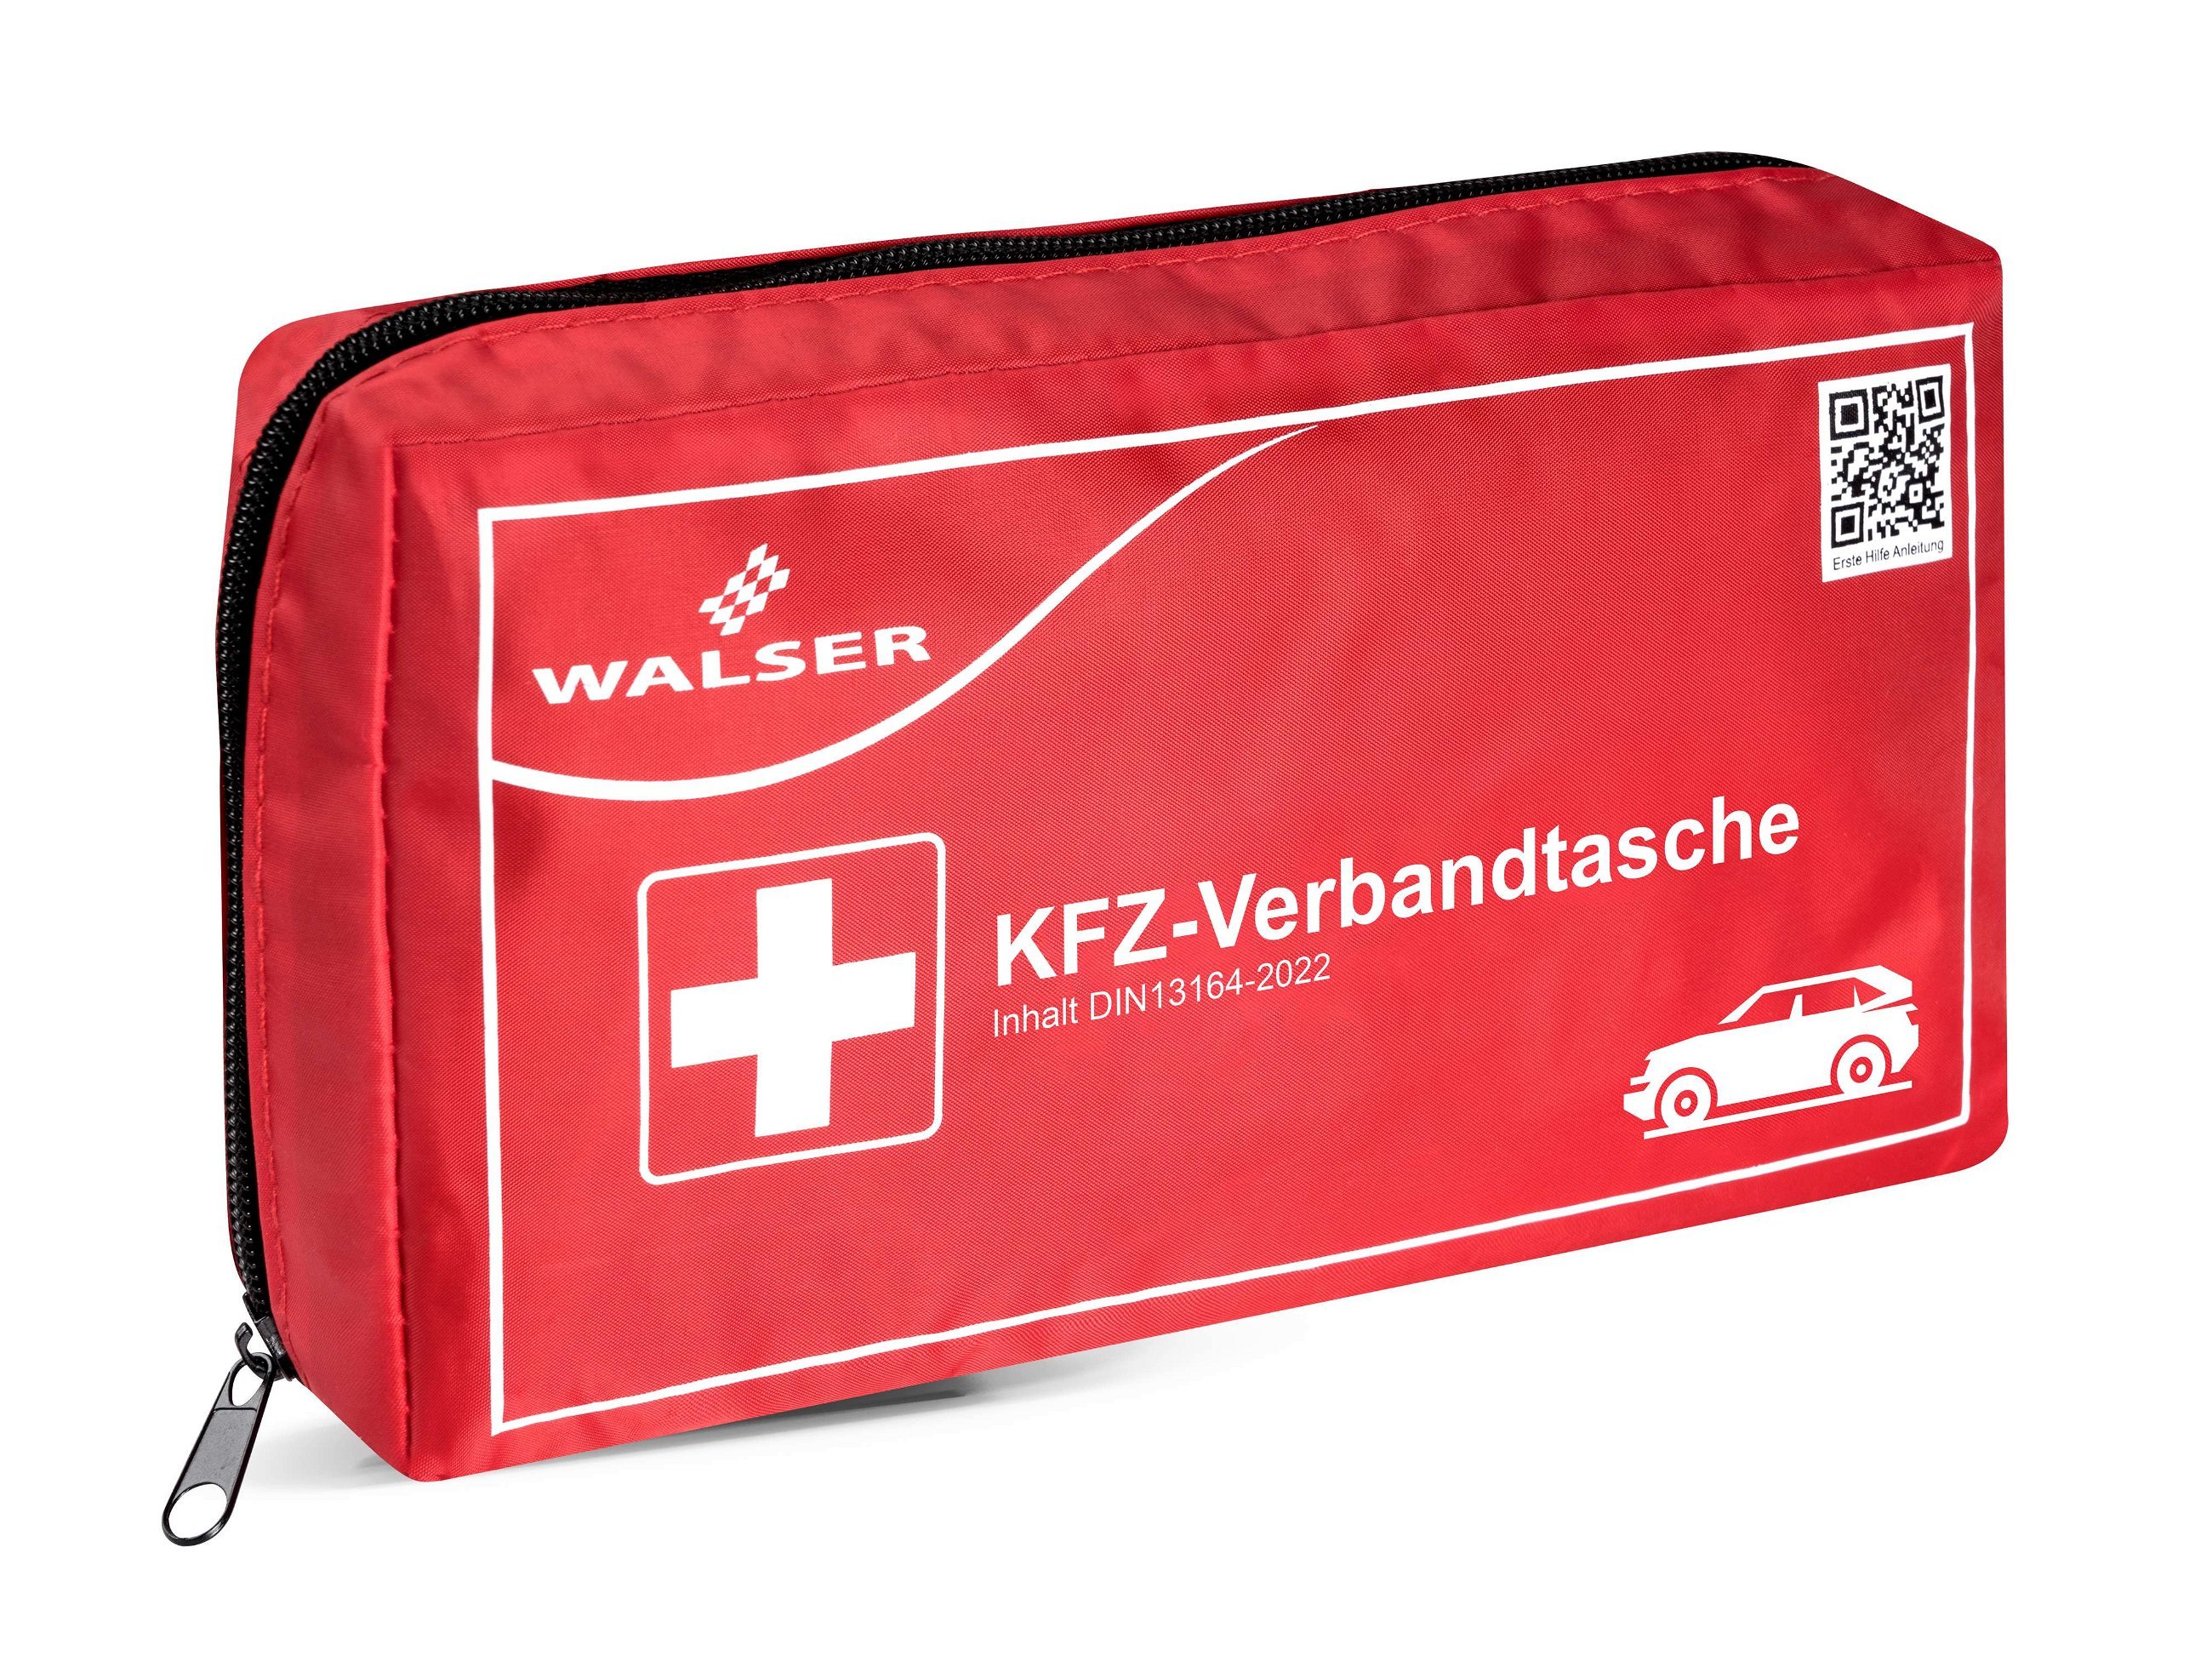 Red first aid kit for the car, compliant with DIN 13164:2022, car first aid kit, red car emergency kit